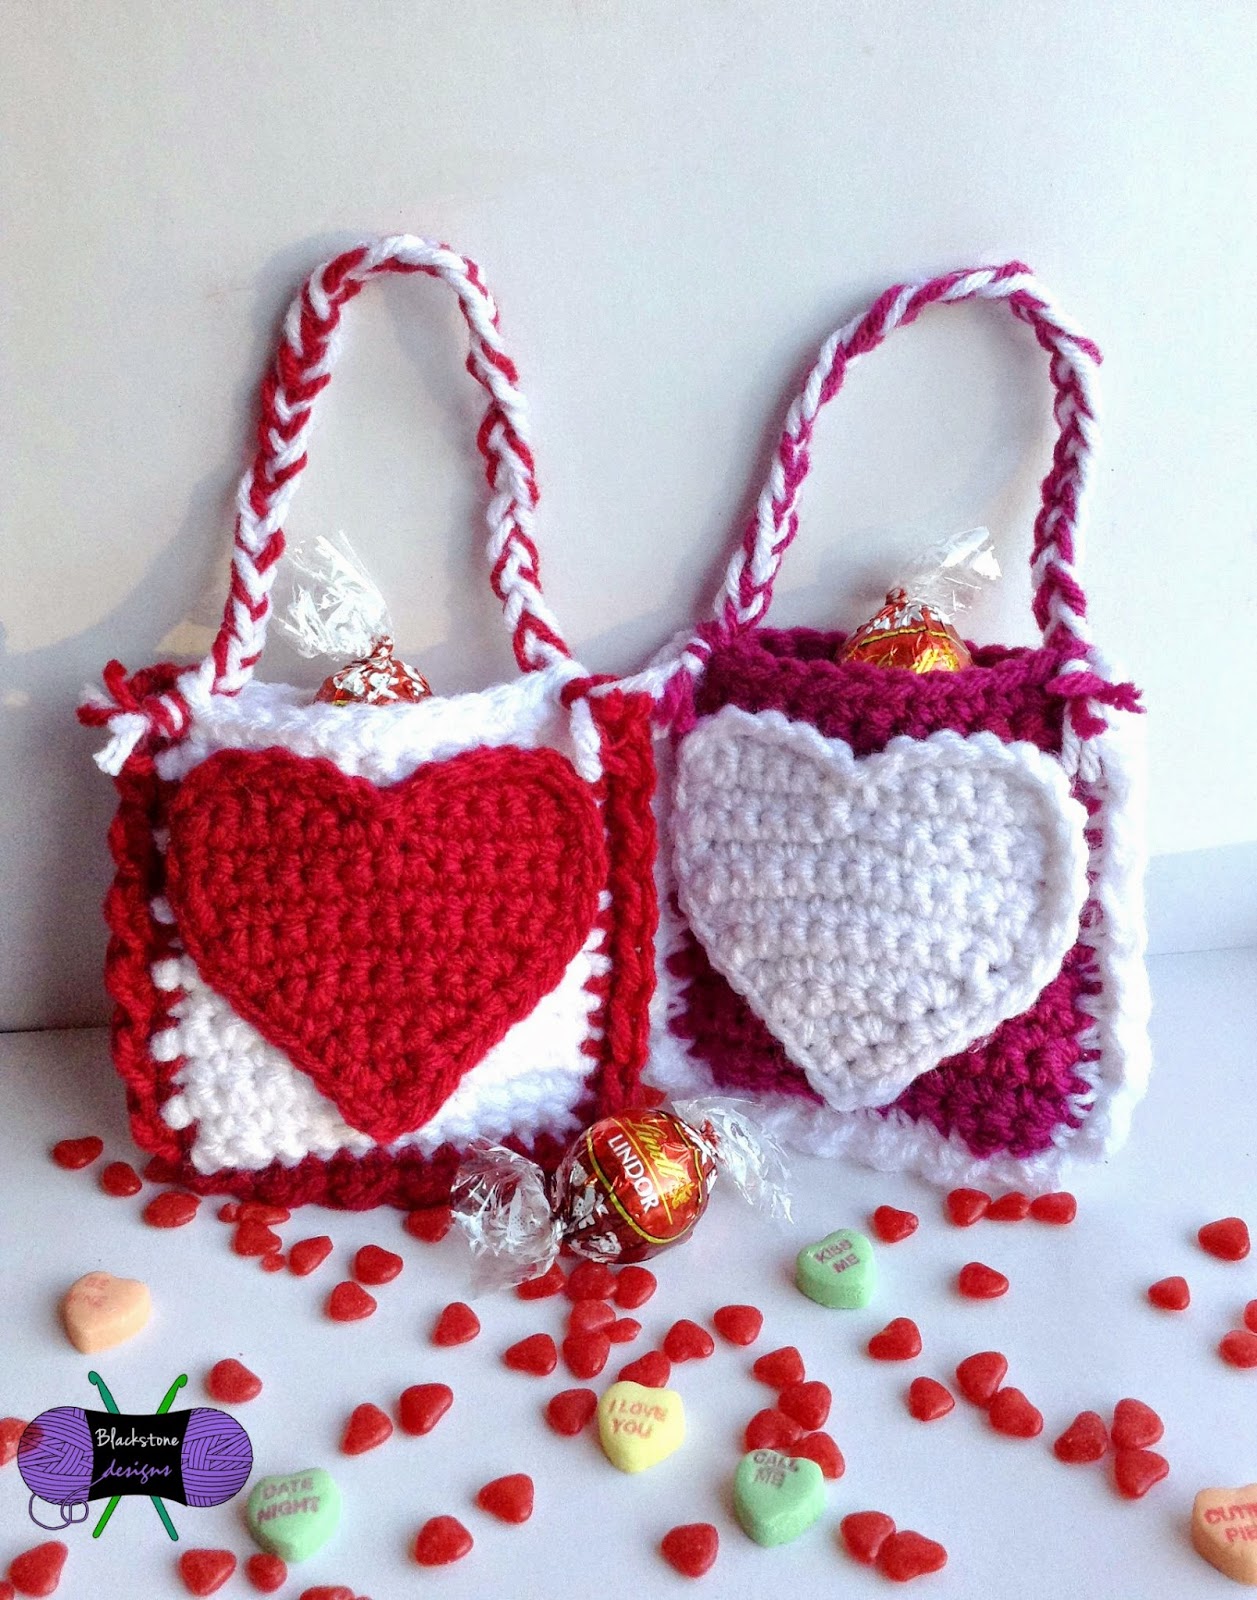 Crochet Valentines Day Gift 24 Valentine's Patterns {Projects To Put A ...